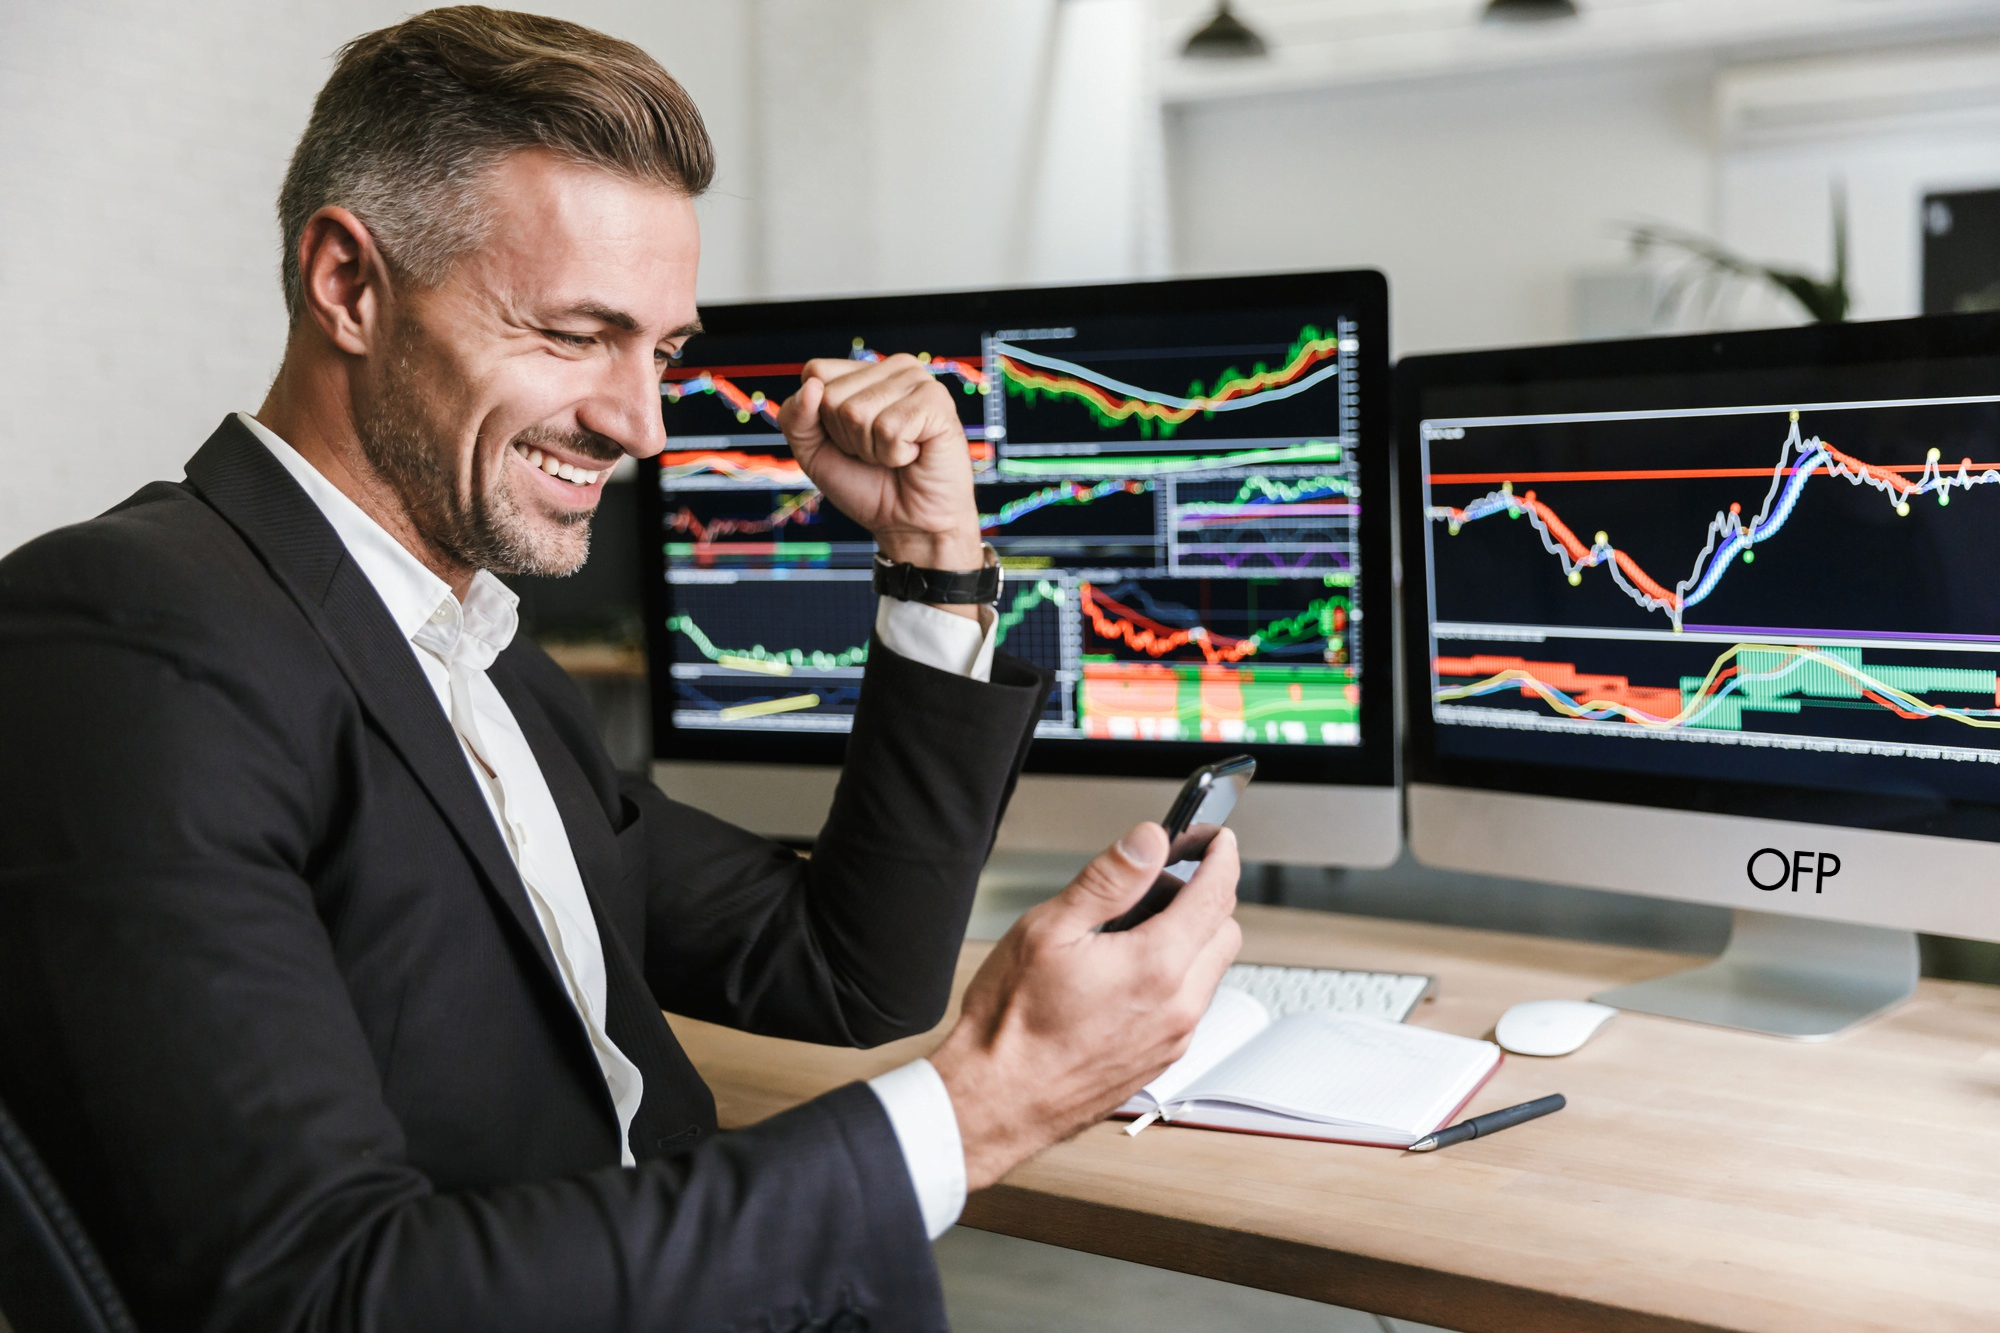 5 surprising facts you didn’t know about forex traders